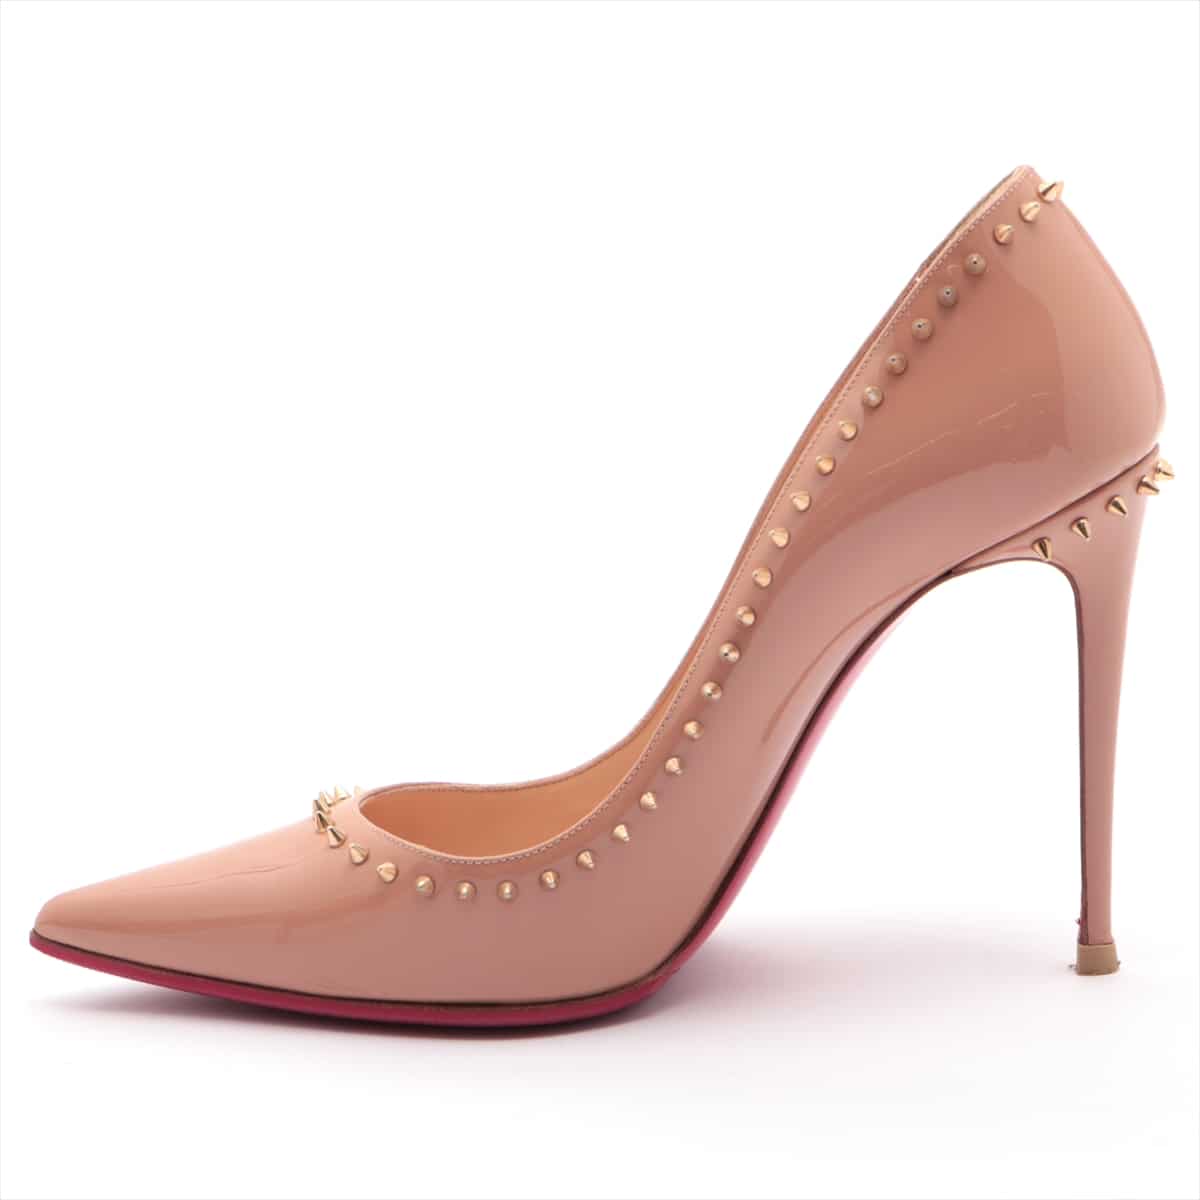 Christian Louboutin Patent leather Pumps 37.5 Ladies' Beige Spike Studs Has half rubber